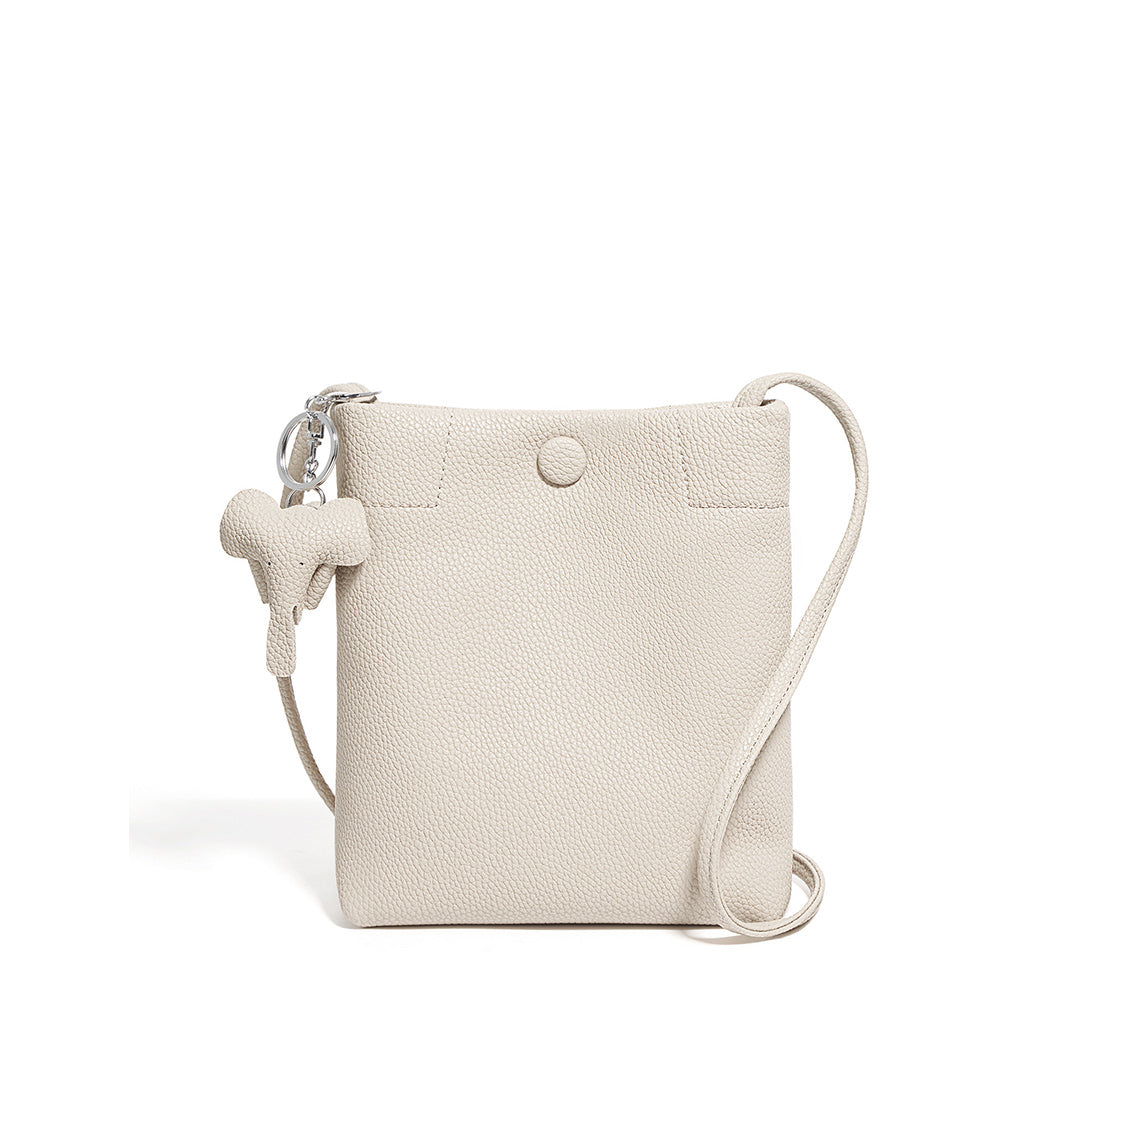 White Leather Crossbody Phone Bag for Women | Small Shoulder Bag Purse - POPSEWING™